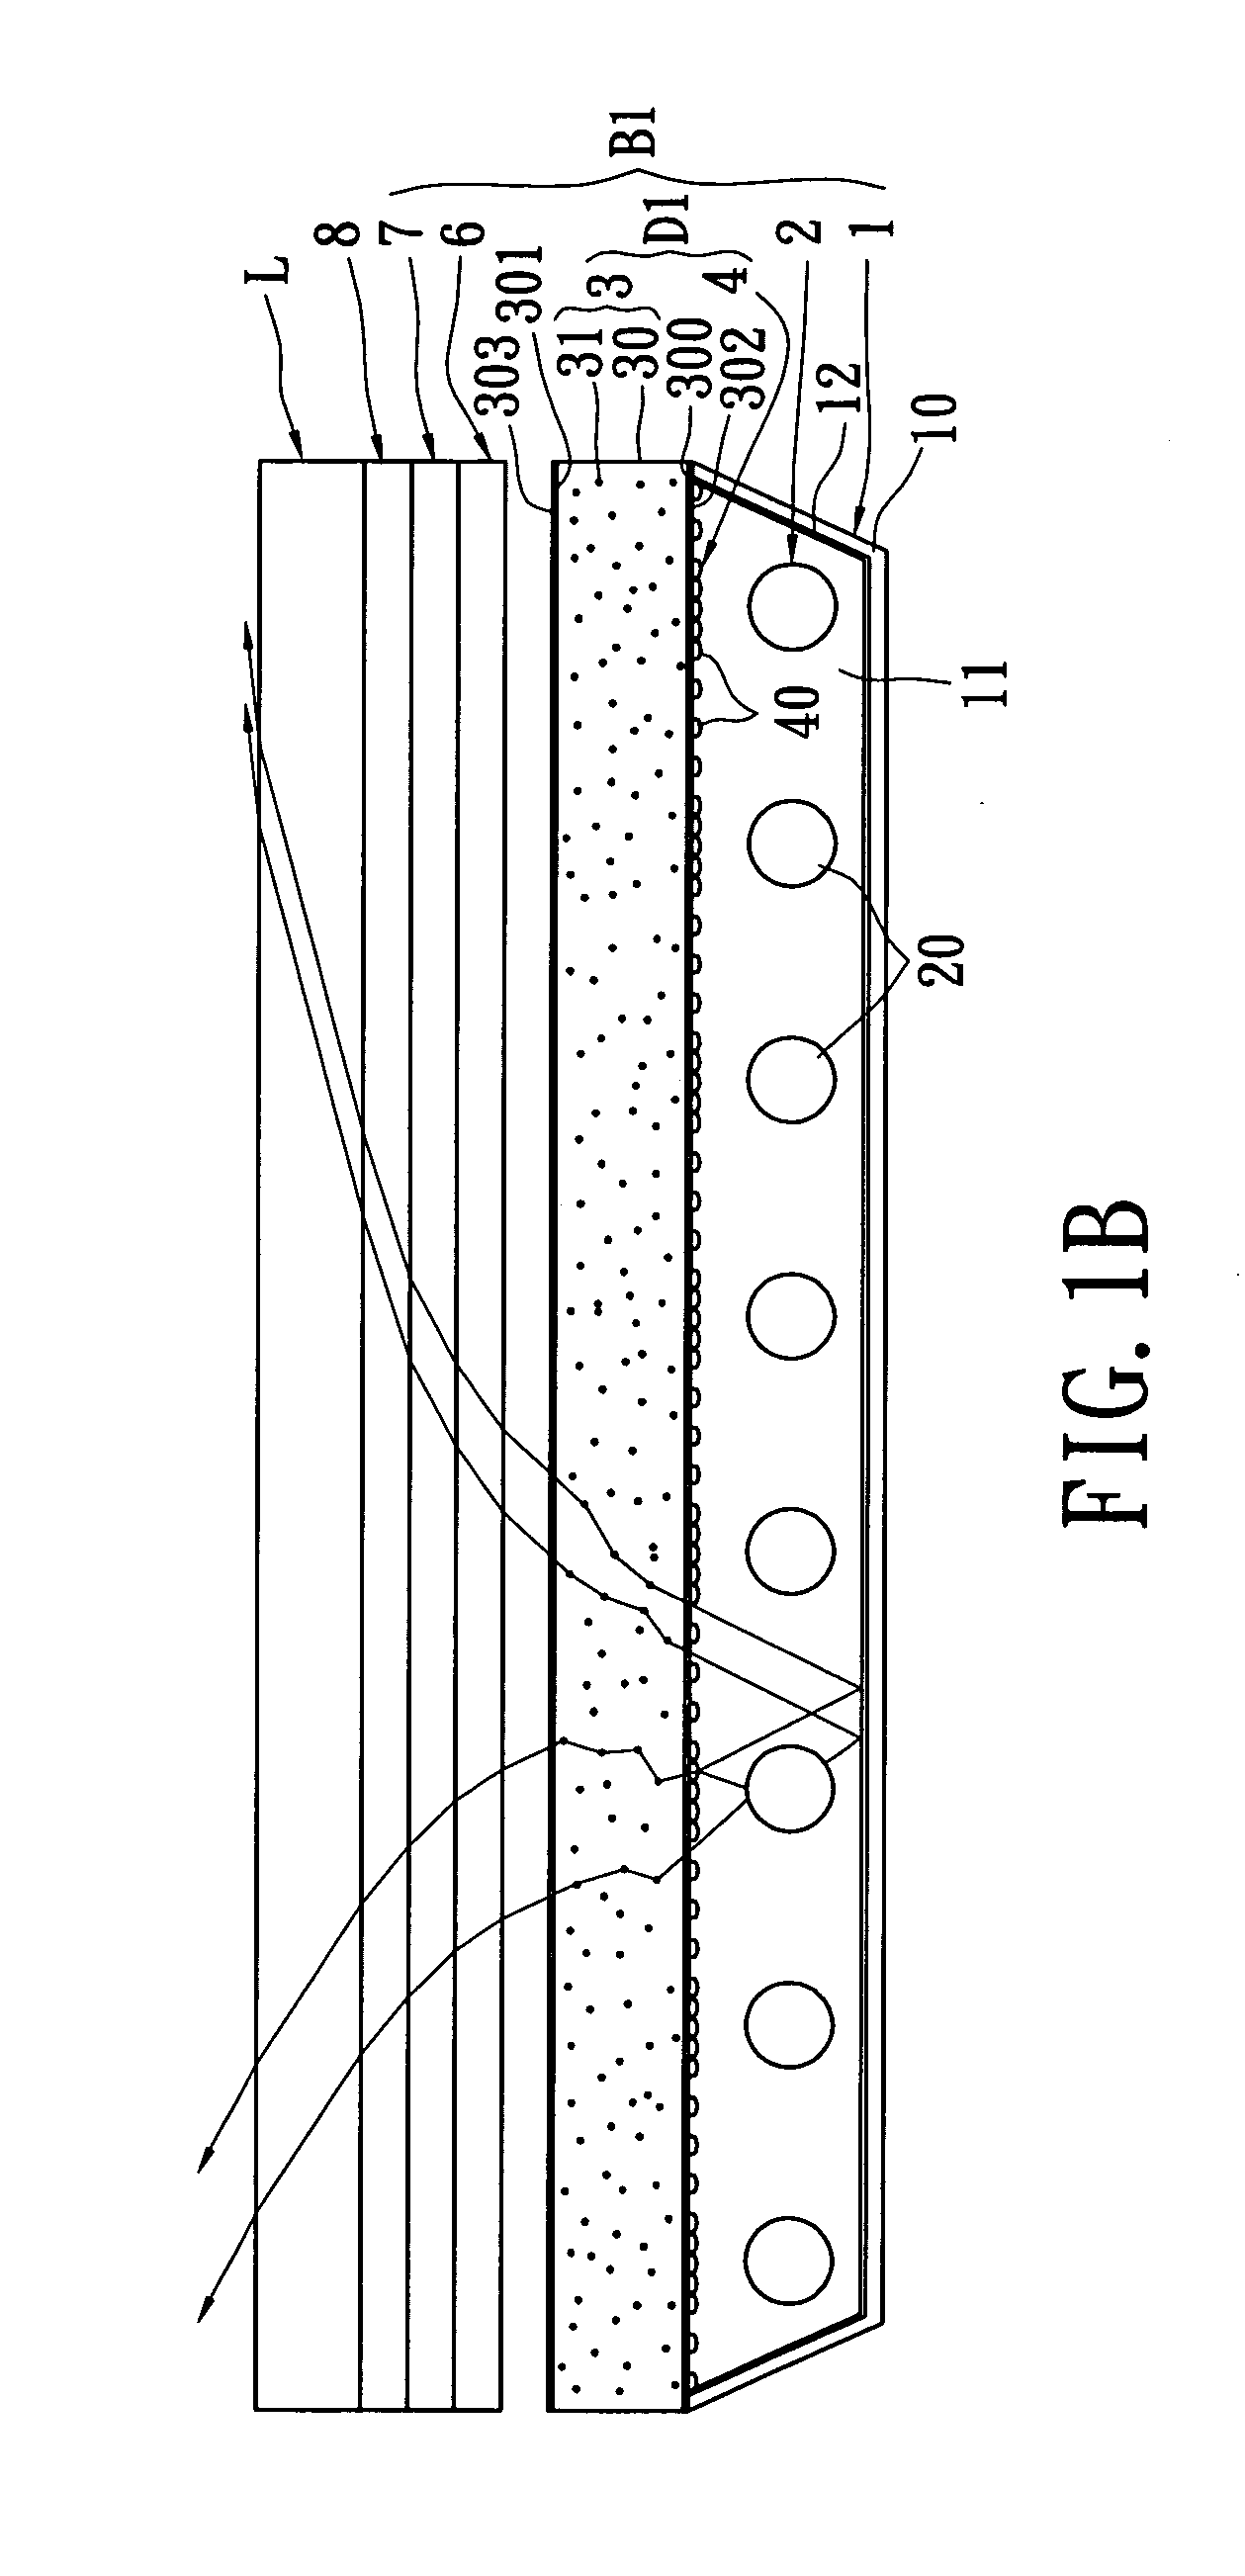 Compound diffusion plate structure, backlight module, and liquid crystal display